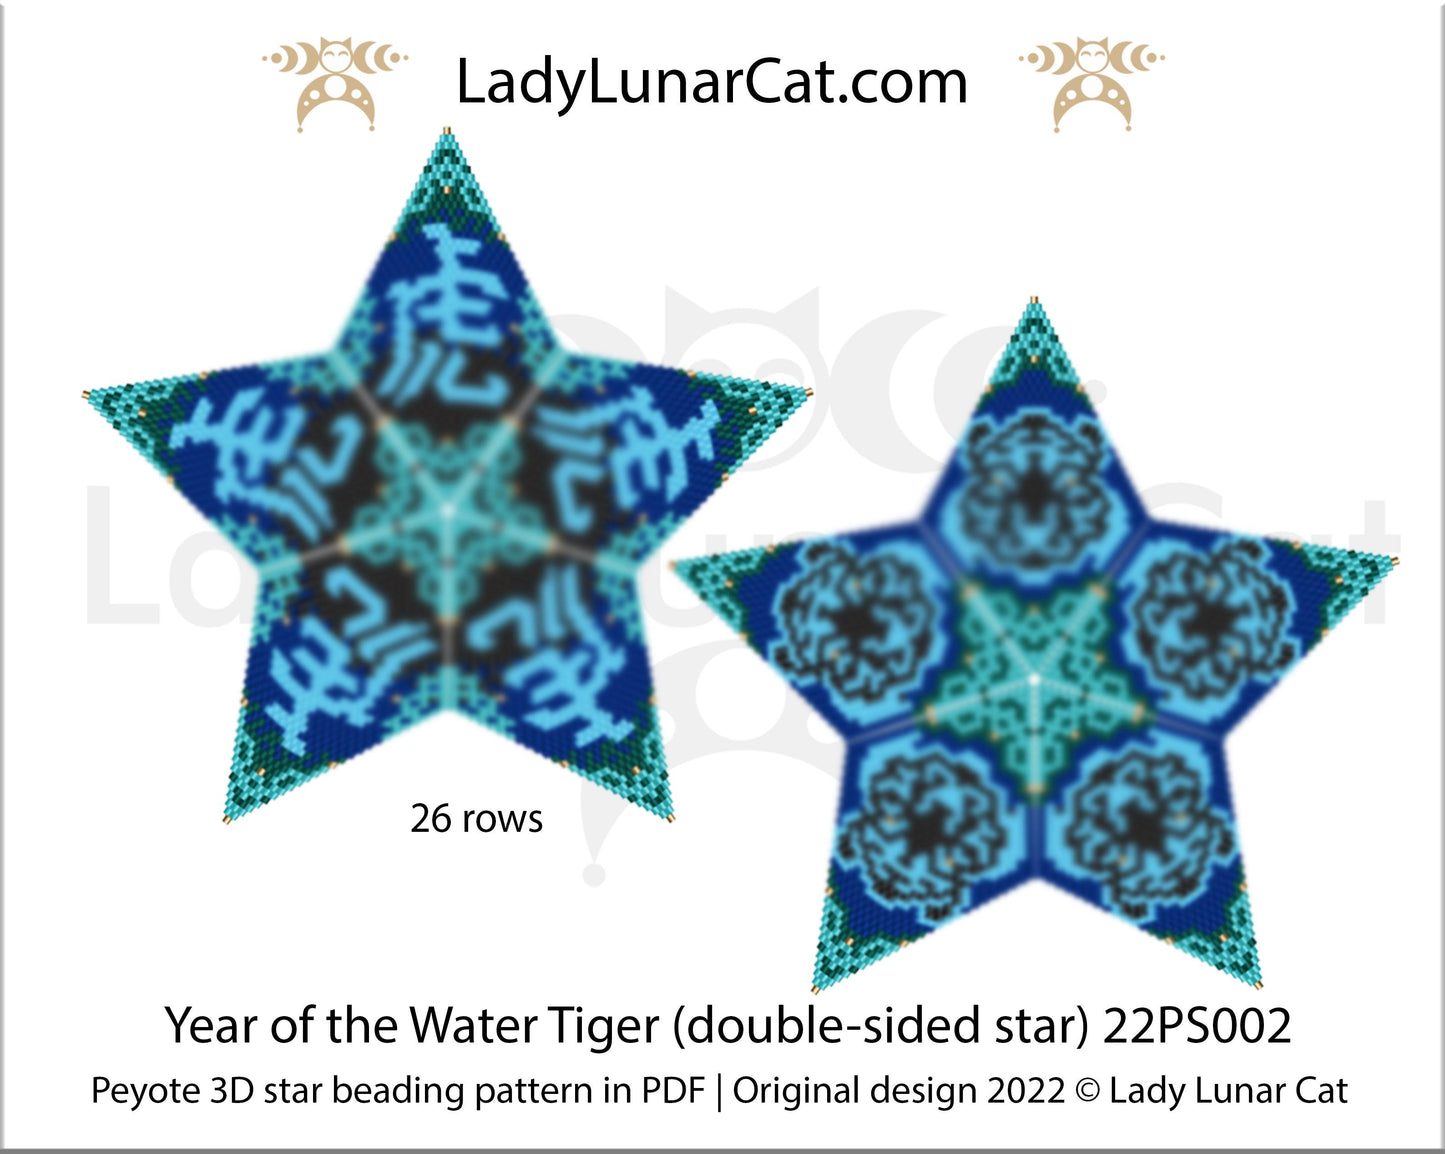 Beaded star pattern for beading- Year of the Water Tiger (double-sided star) 22PS002 26 rows LadyLunarCat